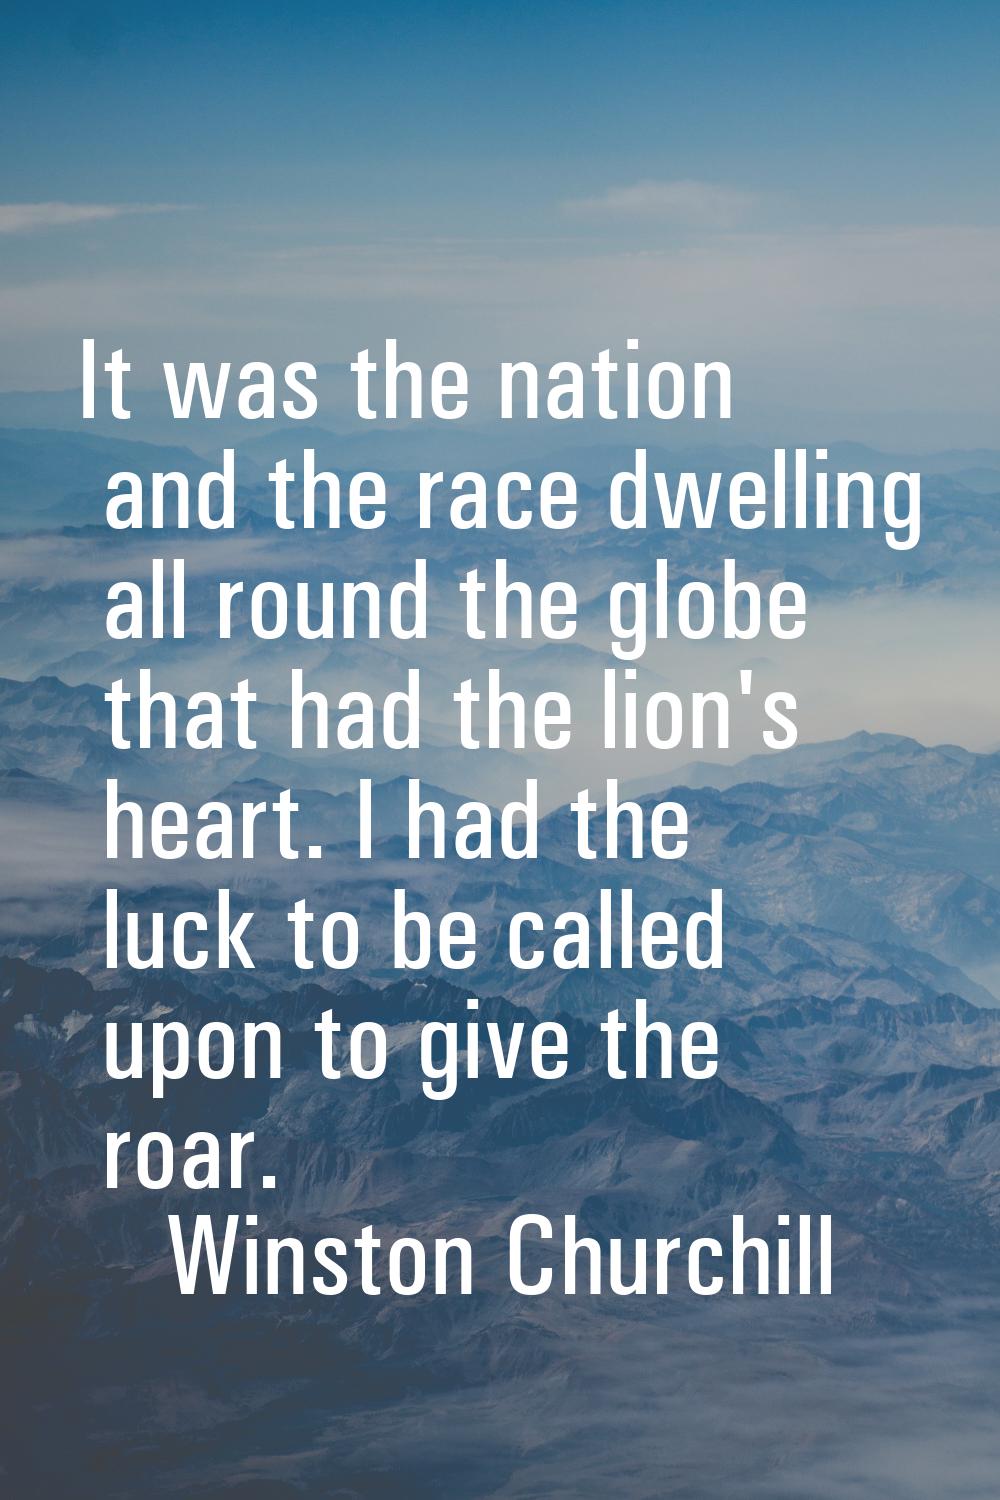 It was the nation and the race dwelling all round the globe that had the lion's heart. I had the lu